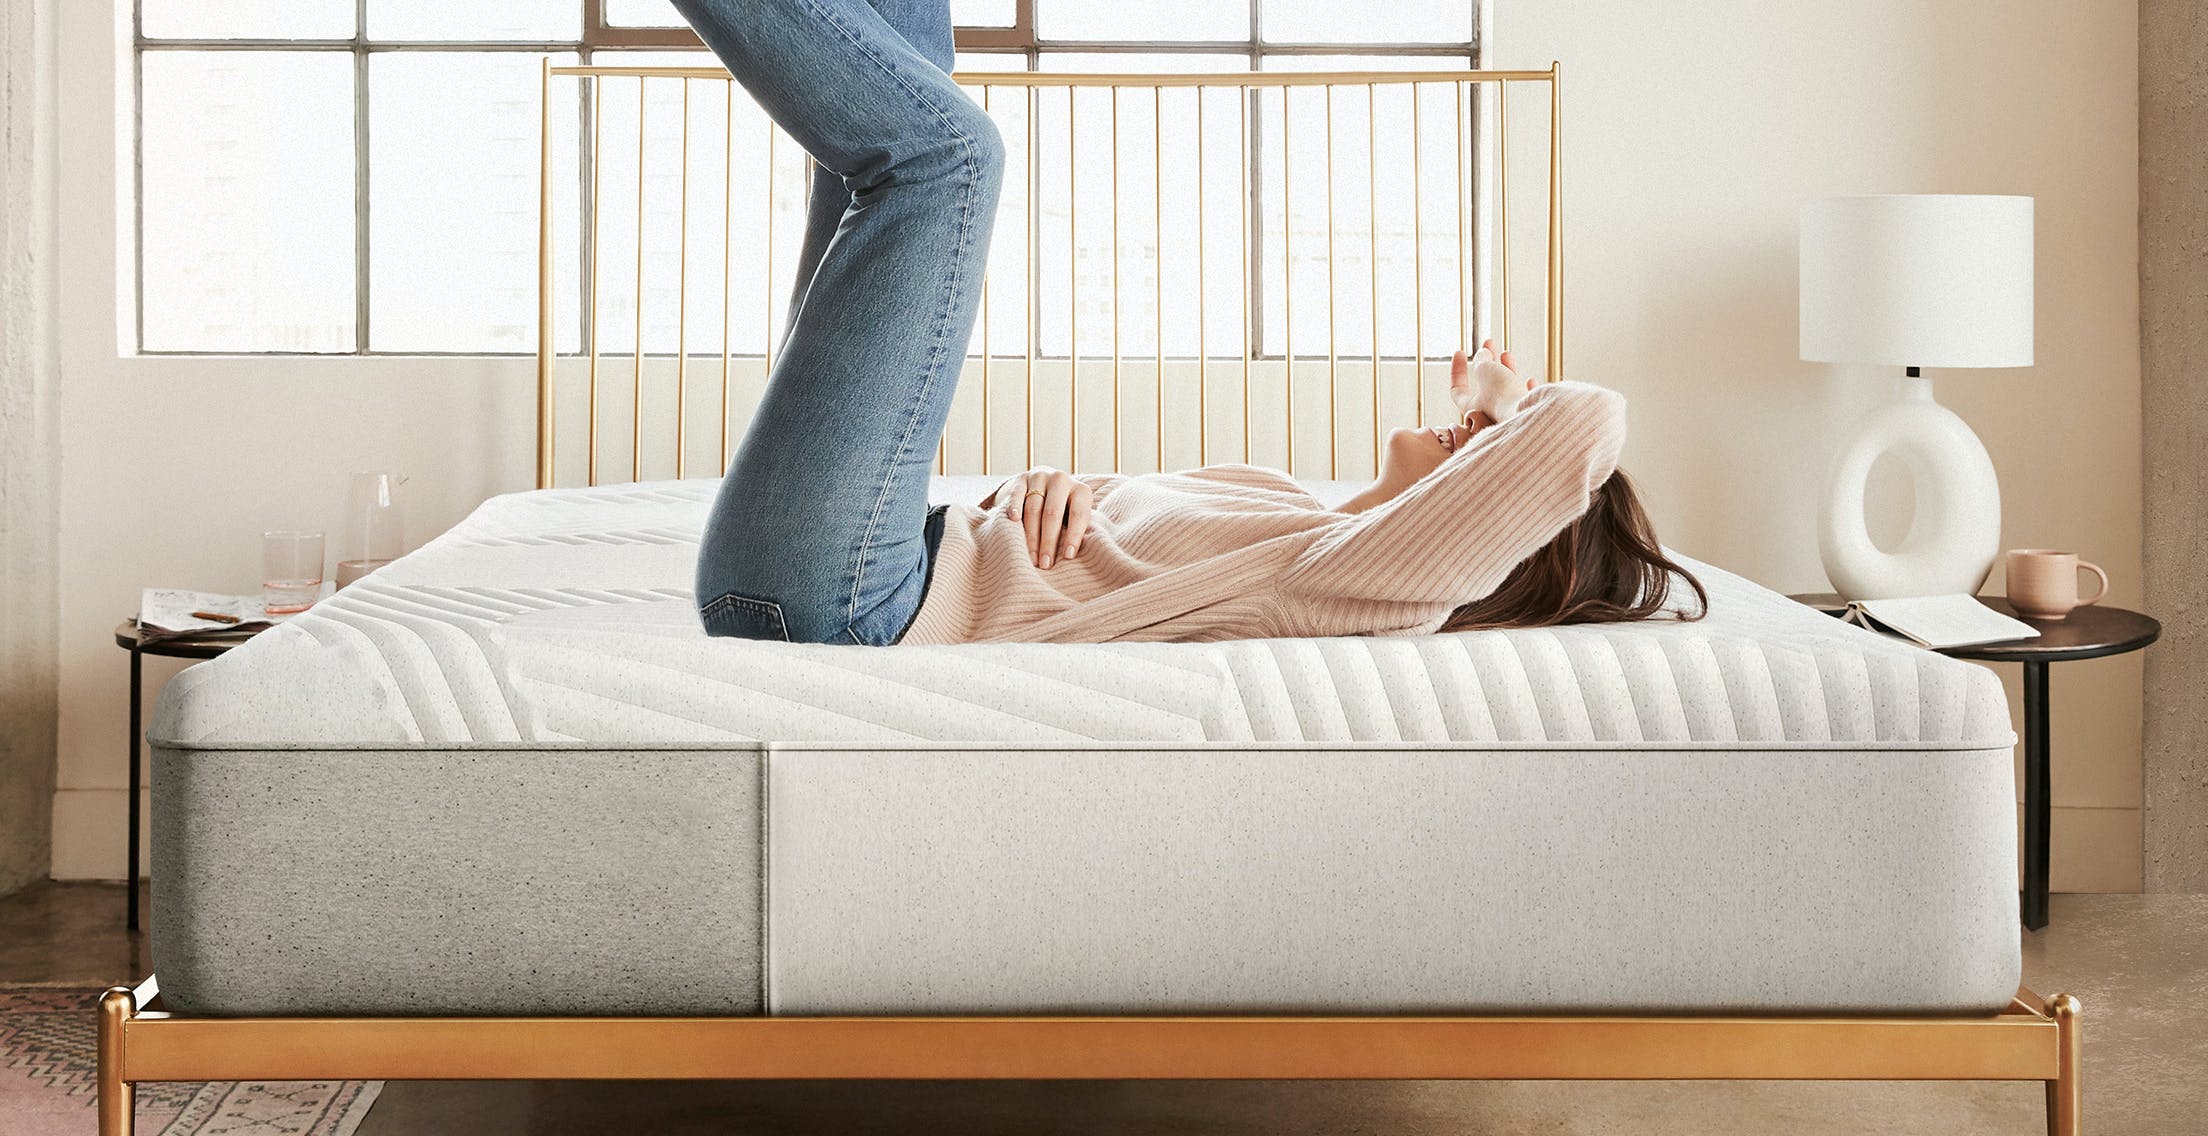 Tips For Finding The Best Deal On A Simmons Mattress